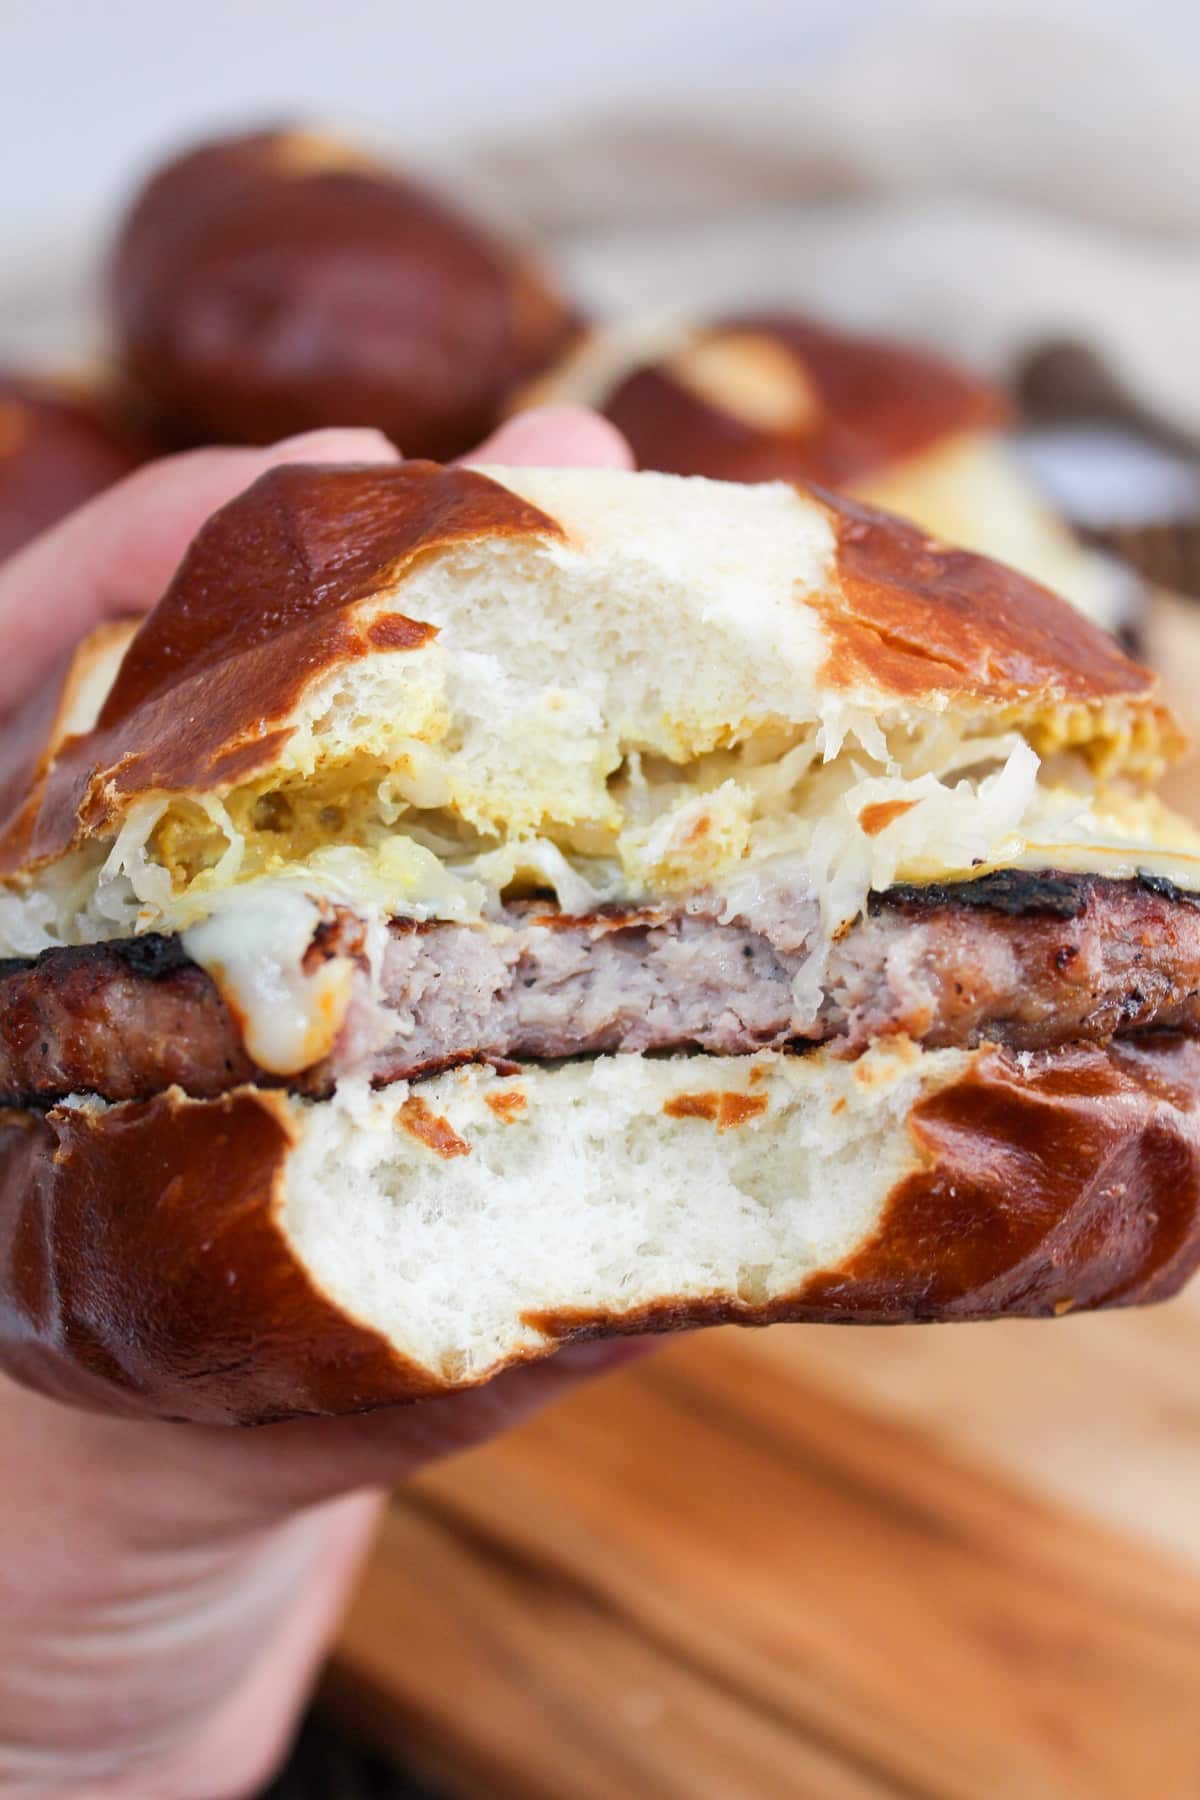 grilled brat pattie on a pretzel roll. The meat is cooked and topped with melted cheese, mustard, and sauerkraut. The burger is held in hand and there is a bite taken from the center.